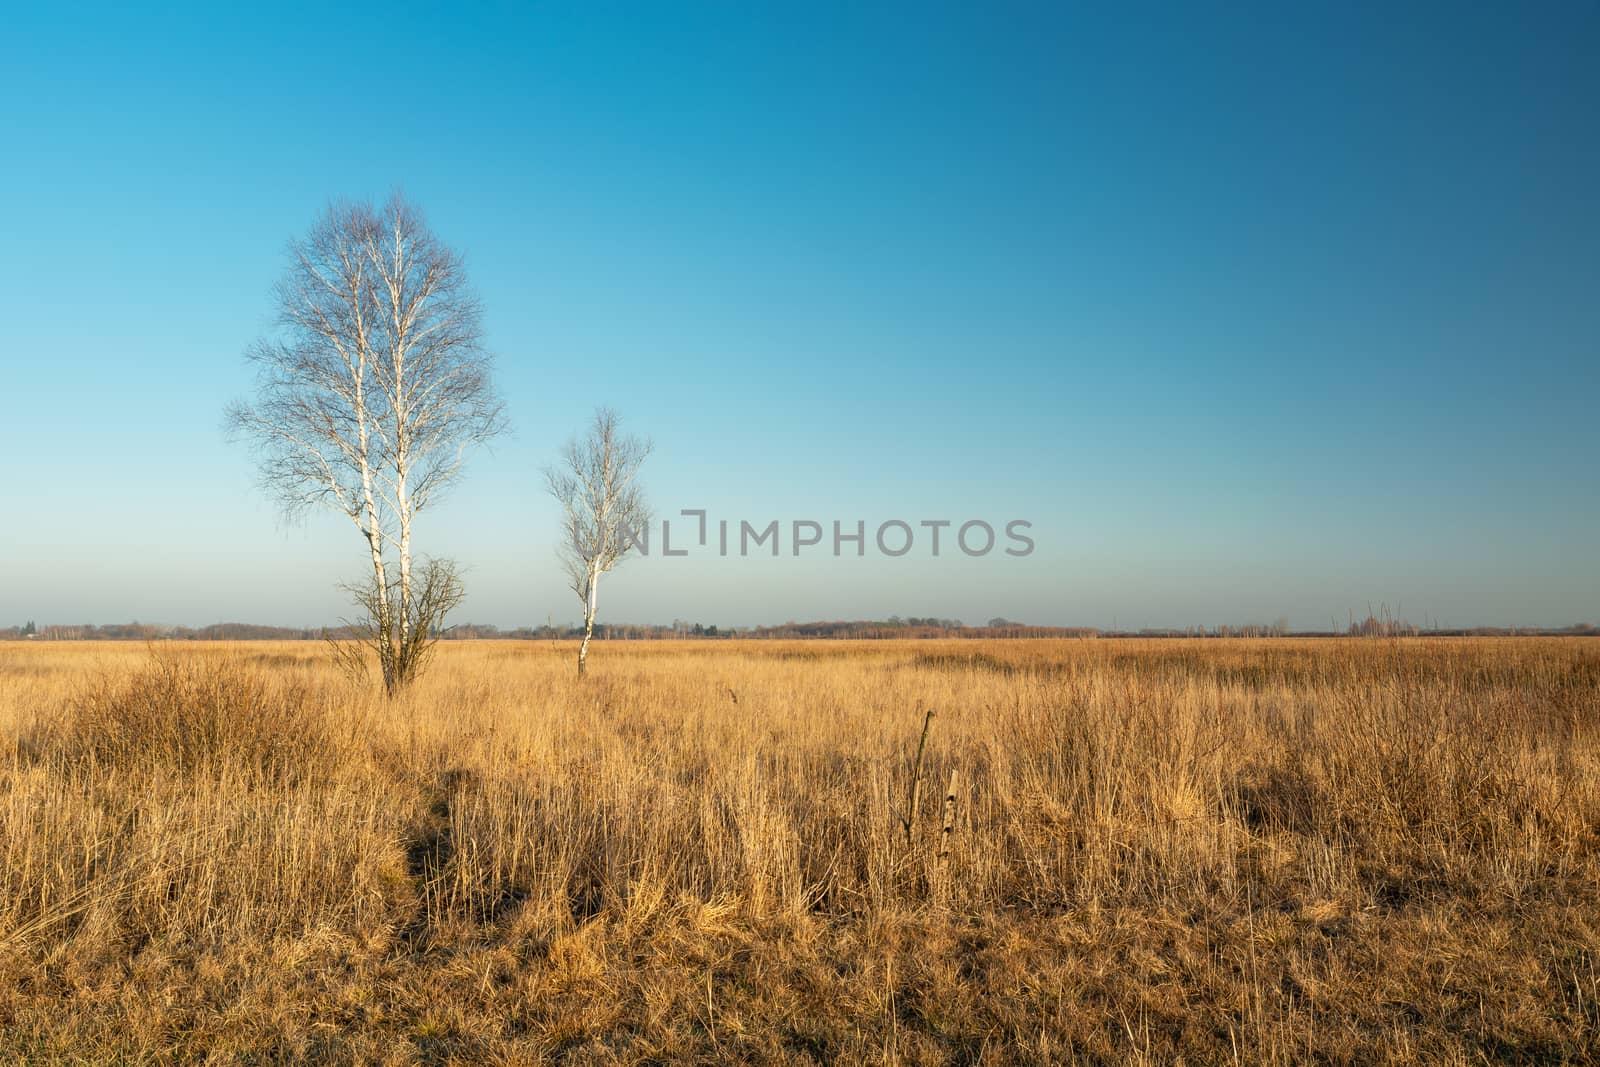 Leafless birch trees growing among yellow grasses, cloudless blue sky